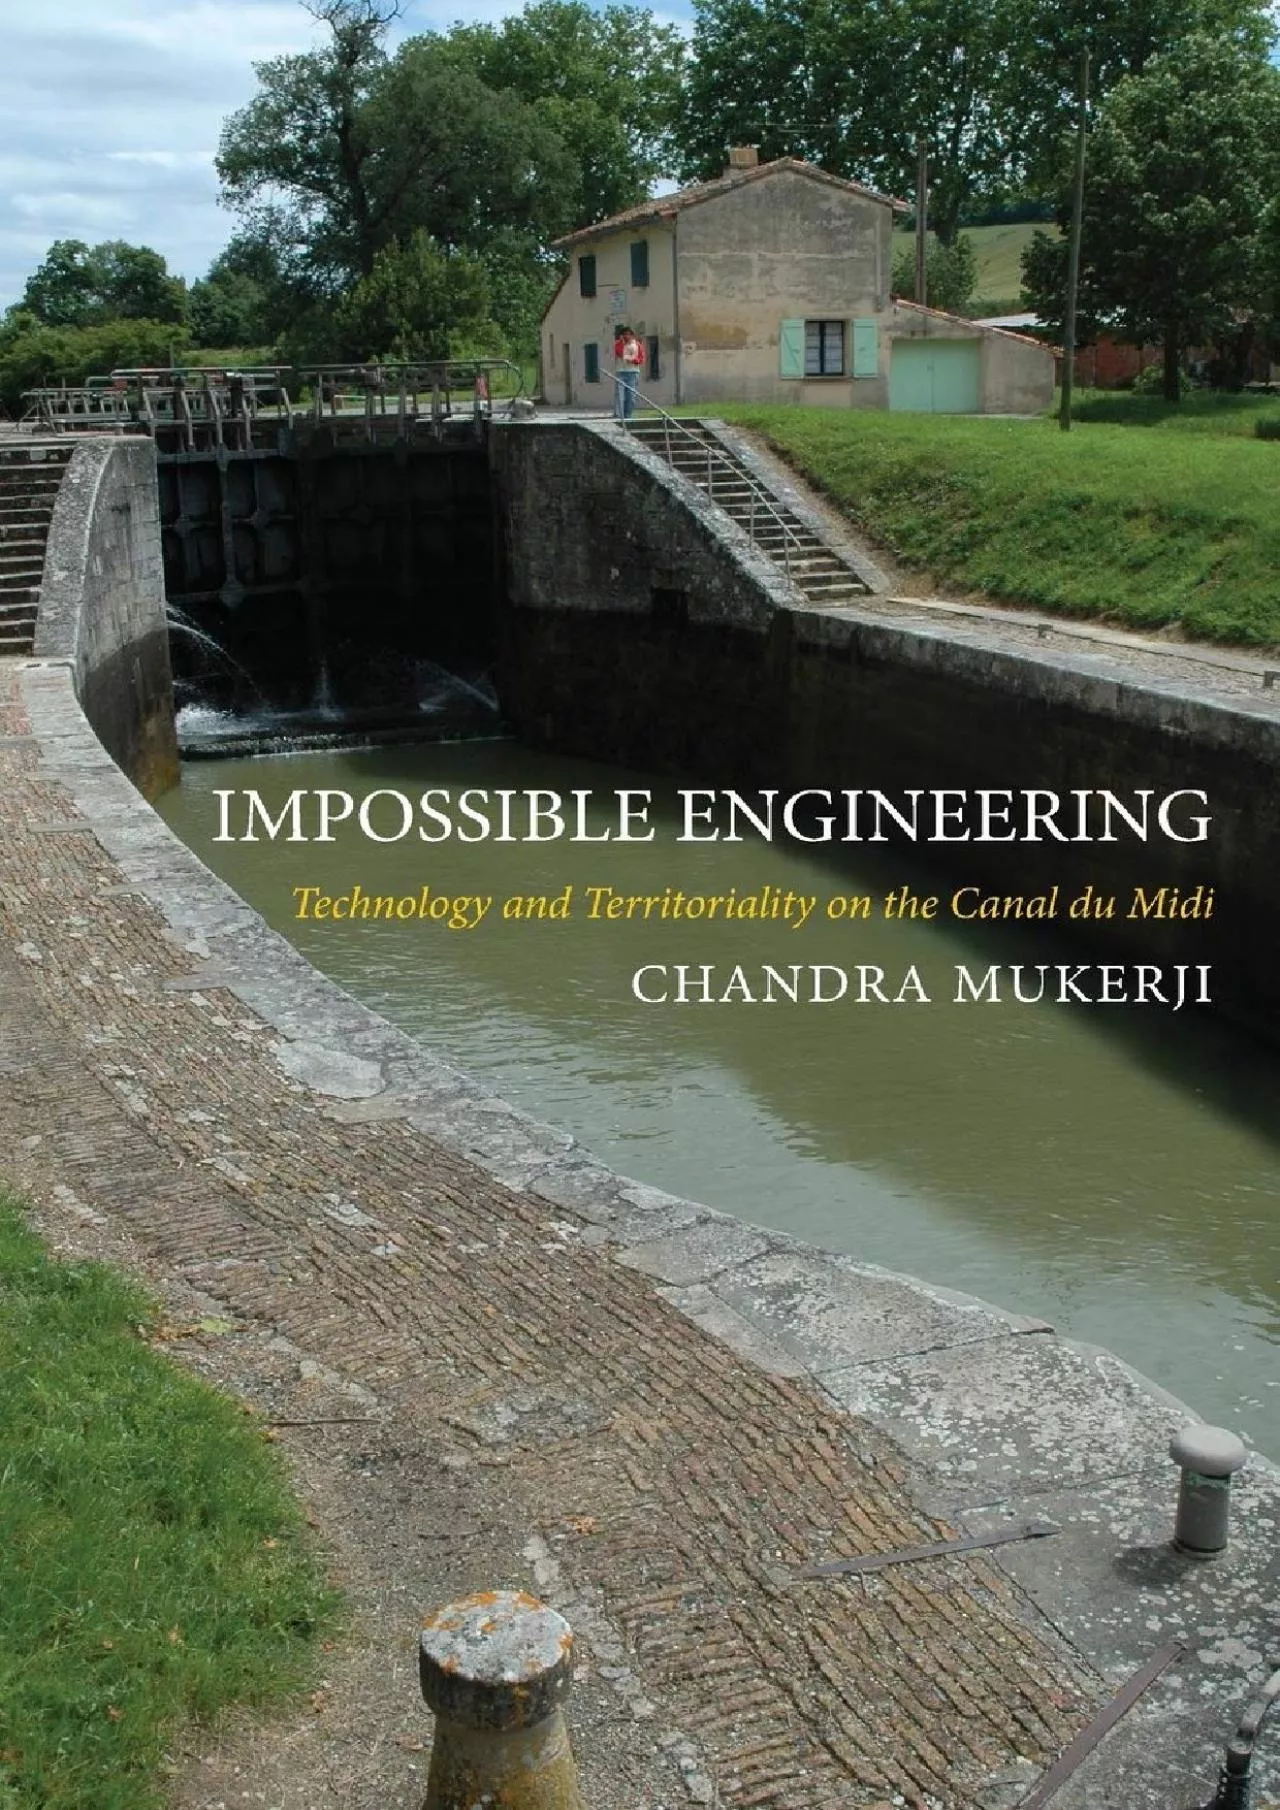 [EBOOK]-Impossible Engineering: Technology and Territoriality on the Canal du Midi (Princeton